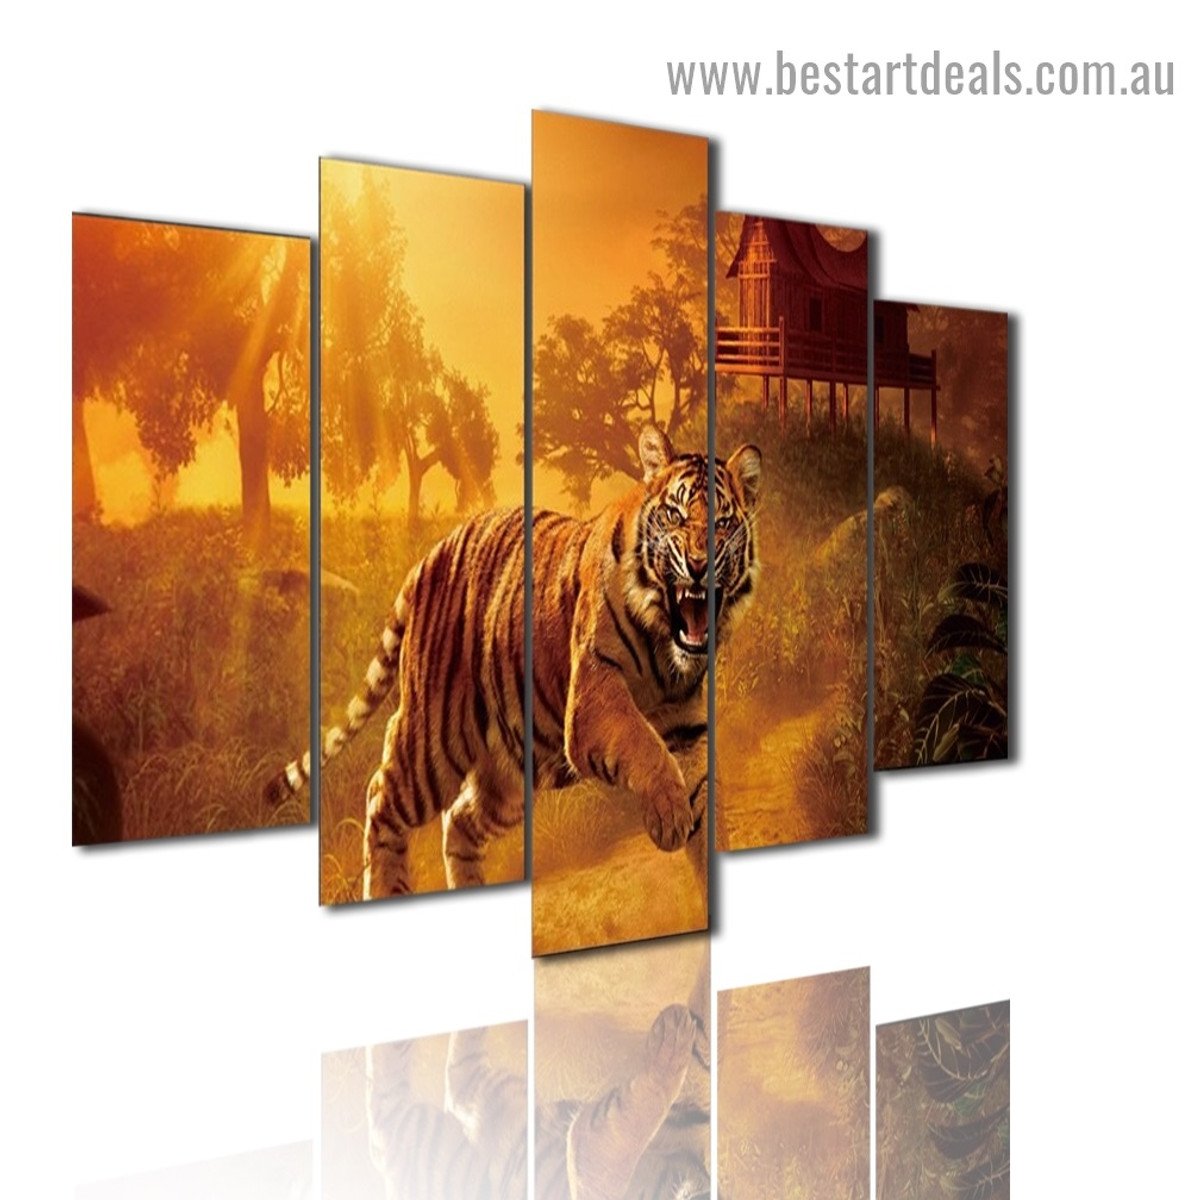 Scary Angry Tiger Animal Botanical Modern Artwork Picture Canvas Print for Room Wall Adornment